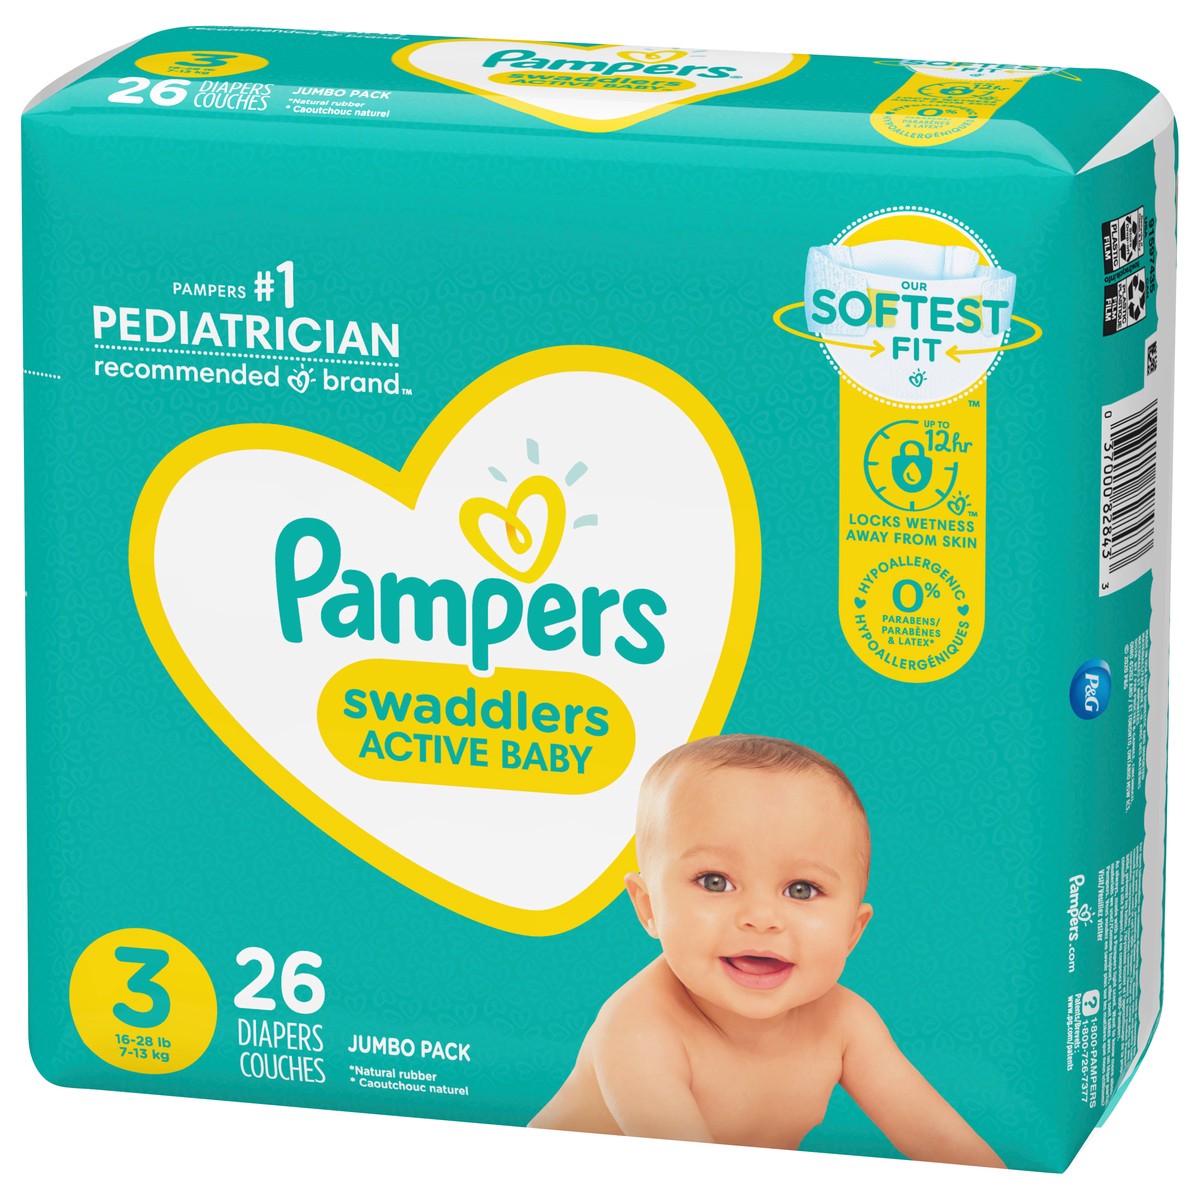 slide 3 of 4, Pampers Swaddlers Active Baby Diaper Size 3 26 Count, 26 ct